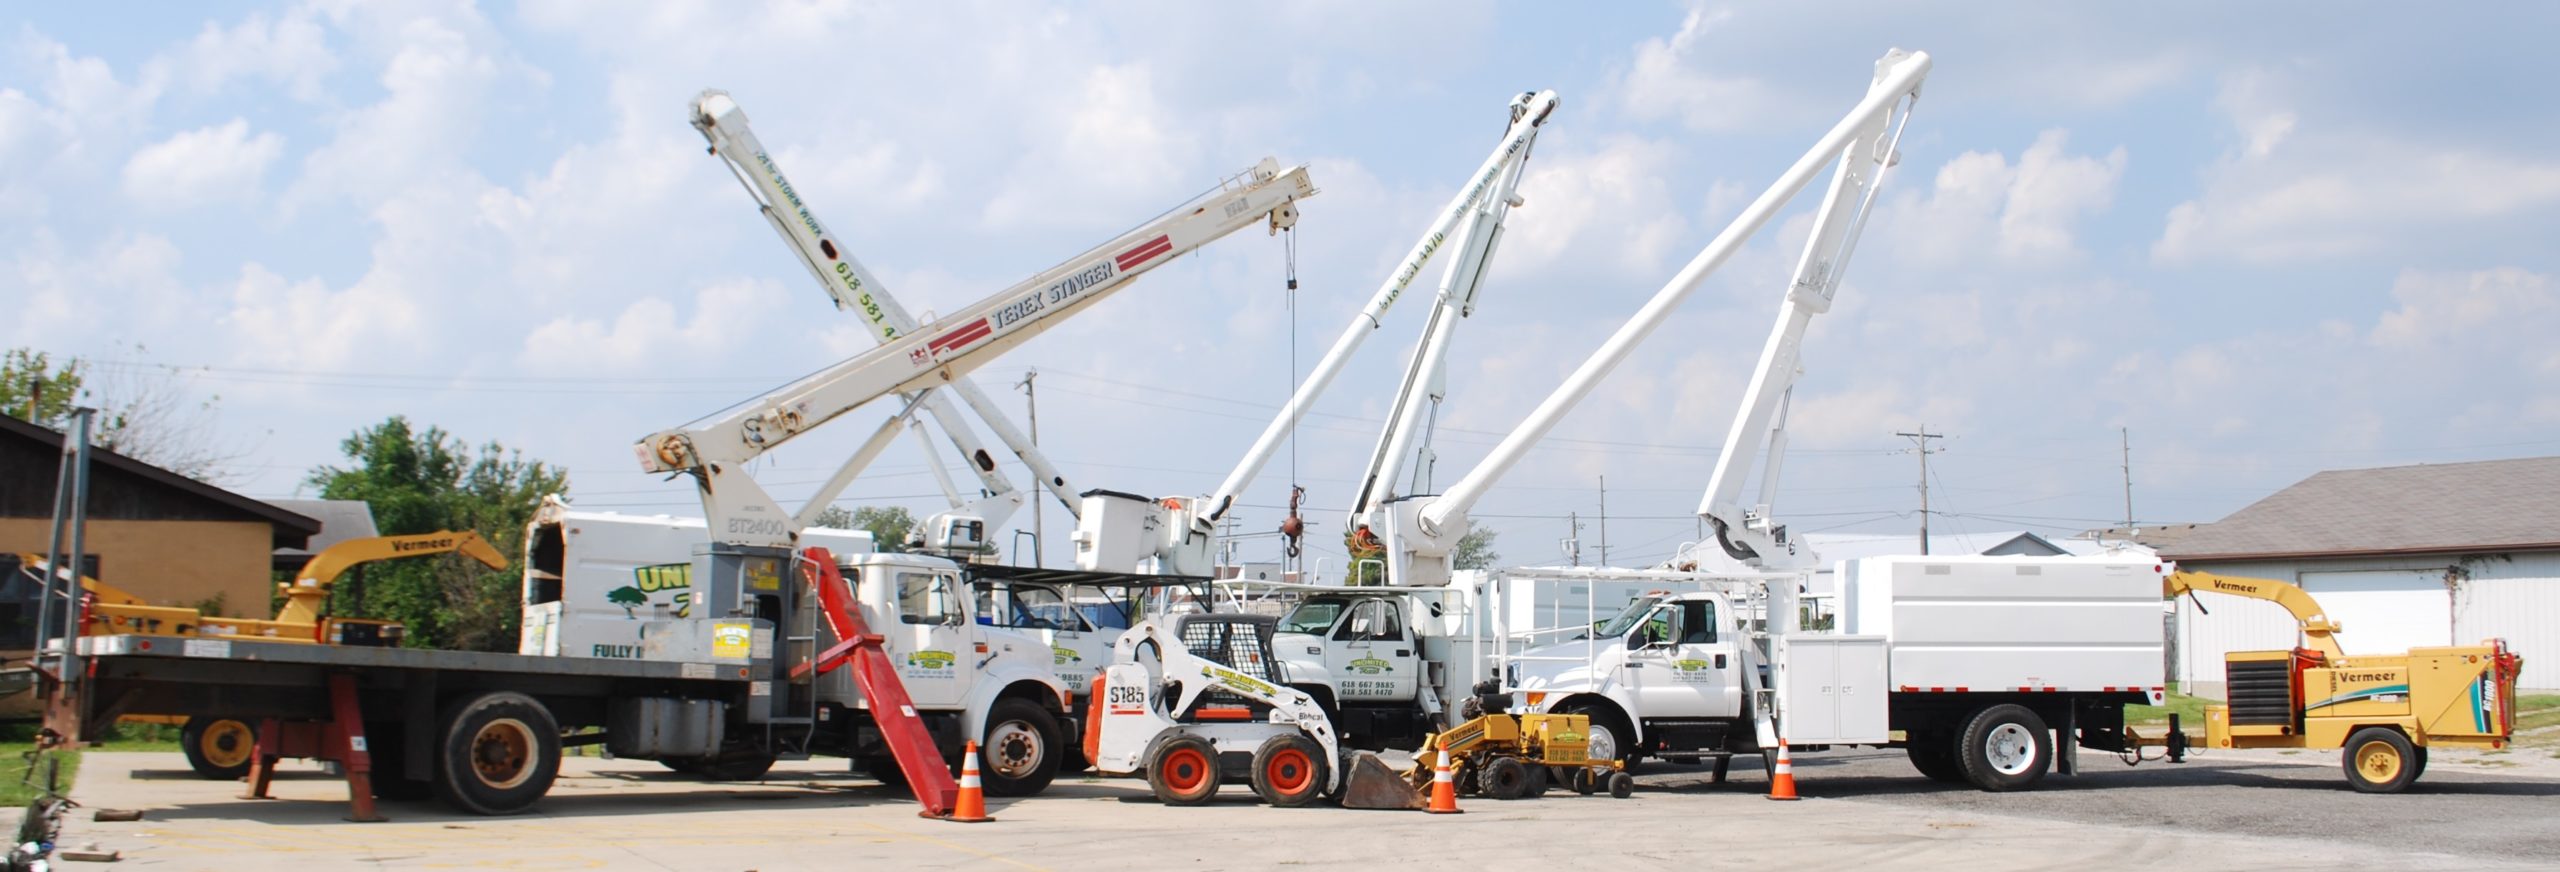 Picture of white tree trimming trucks lined up at a tree removal company in Troy, IL.